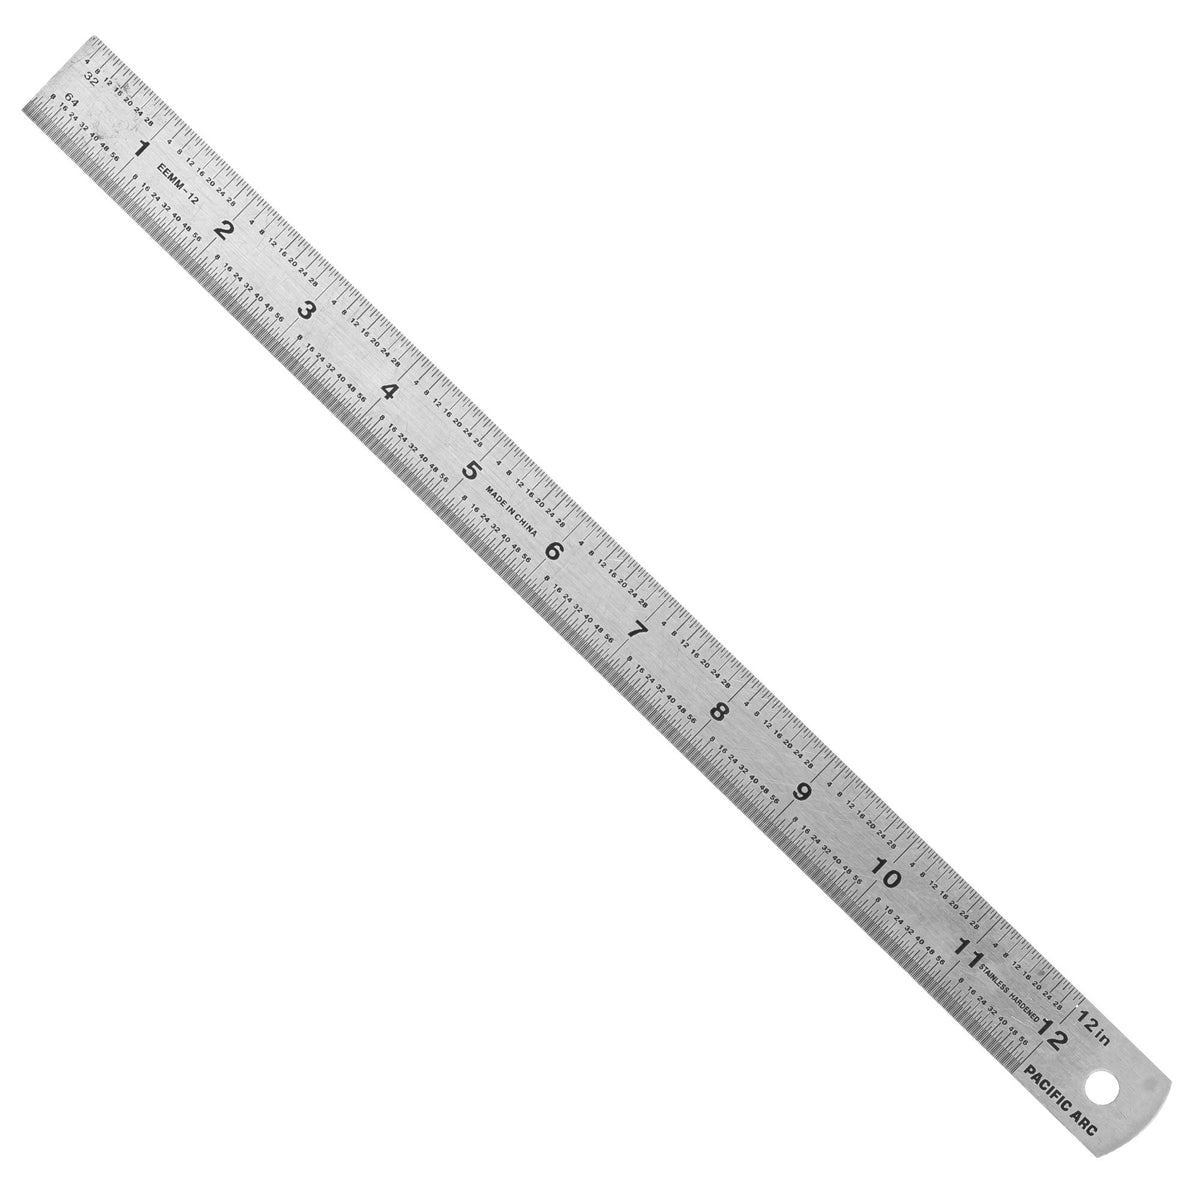 Pacific Ar, Stainless Steel Ruler Inch and Metric, with Inch (8th, 16th, 32nd), Metric (mm)